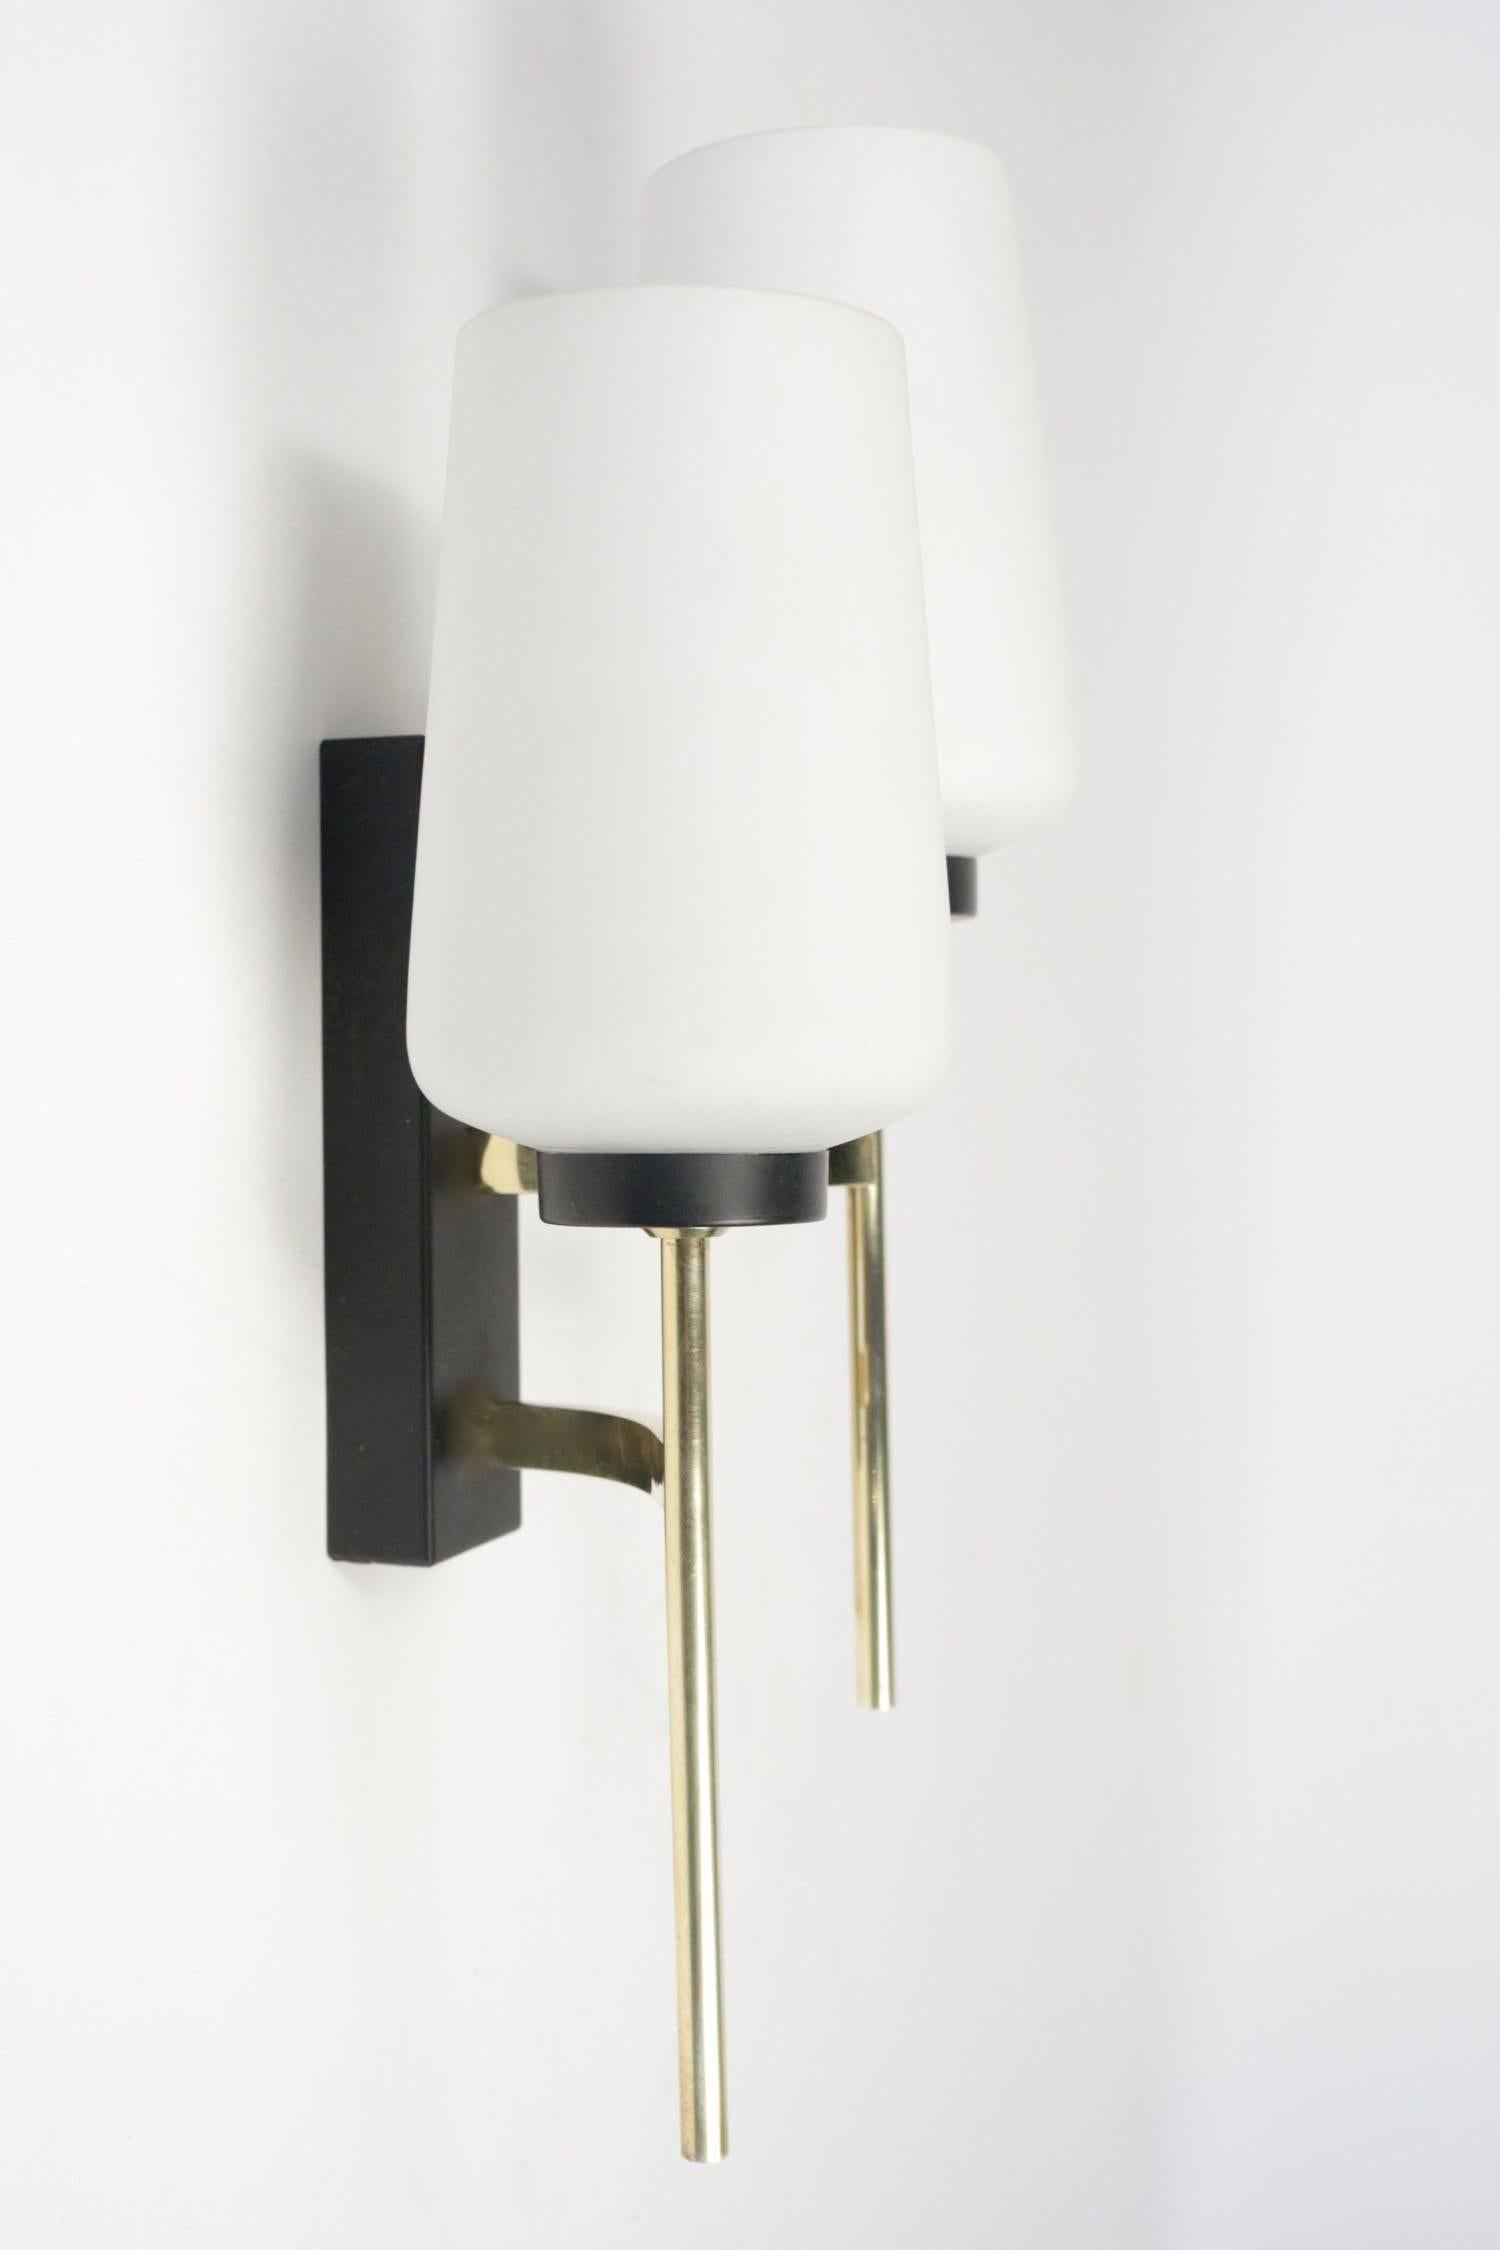 French Pair of 1950s Asymmetrical Sconces by Maison Arlus